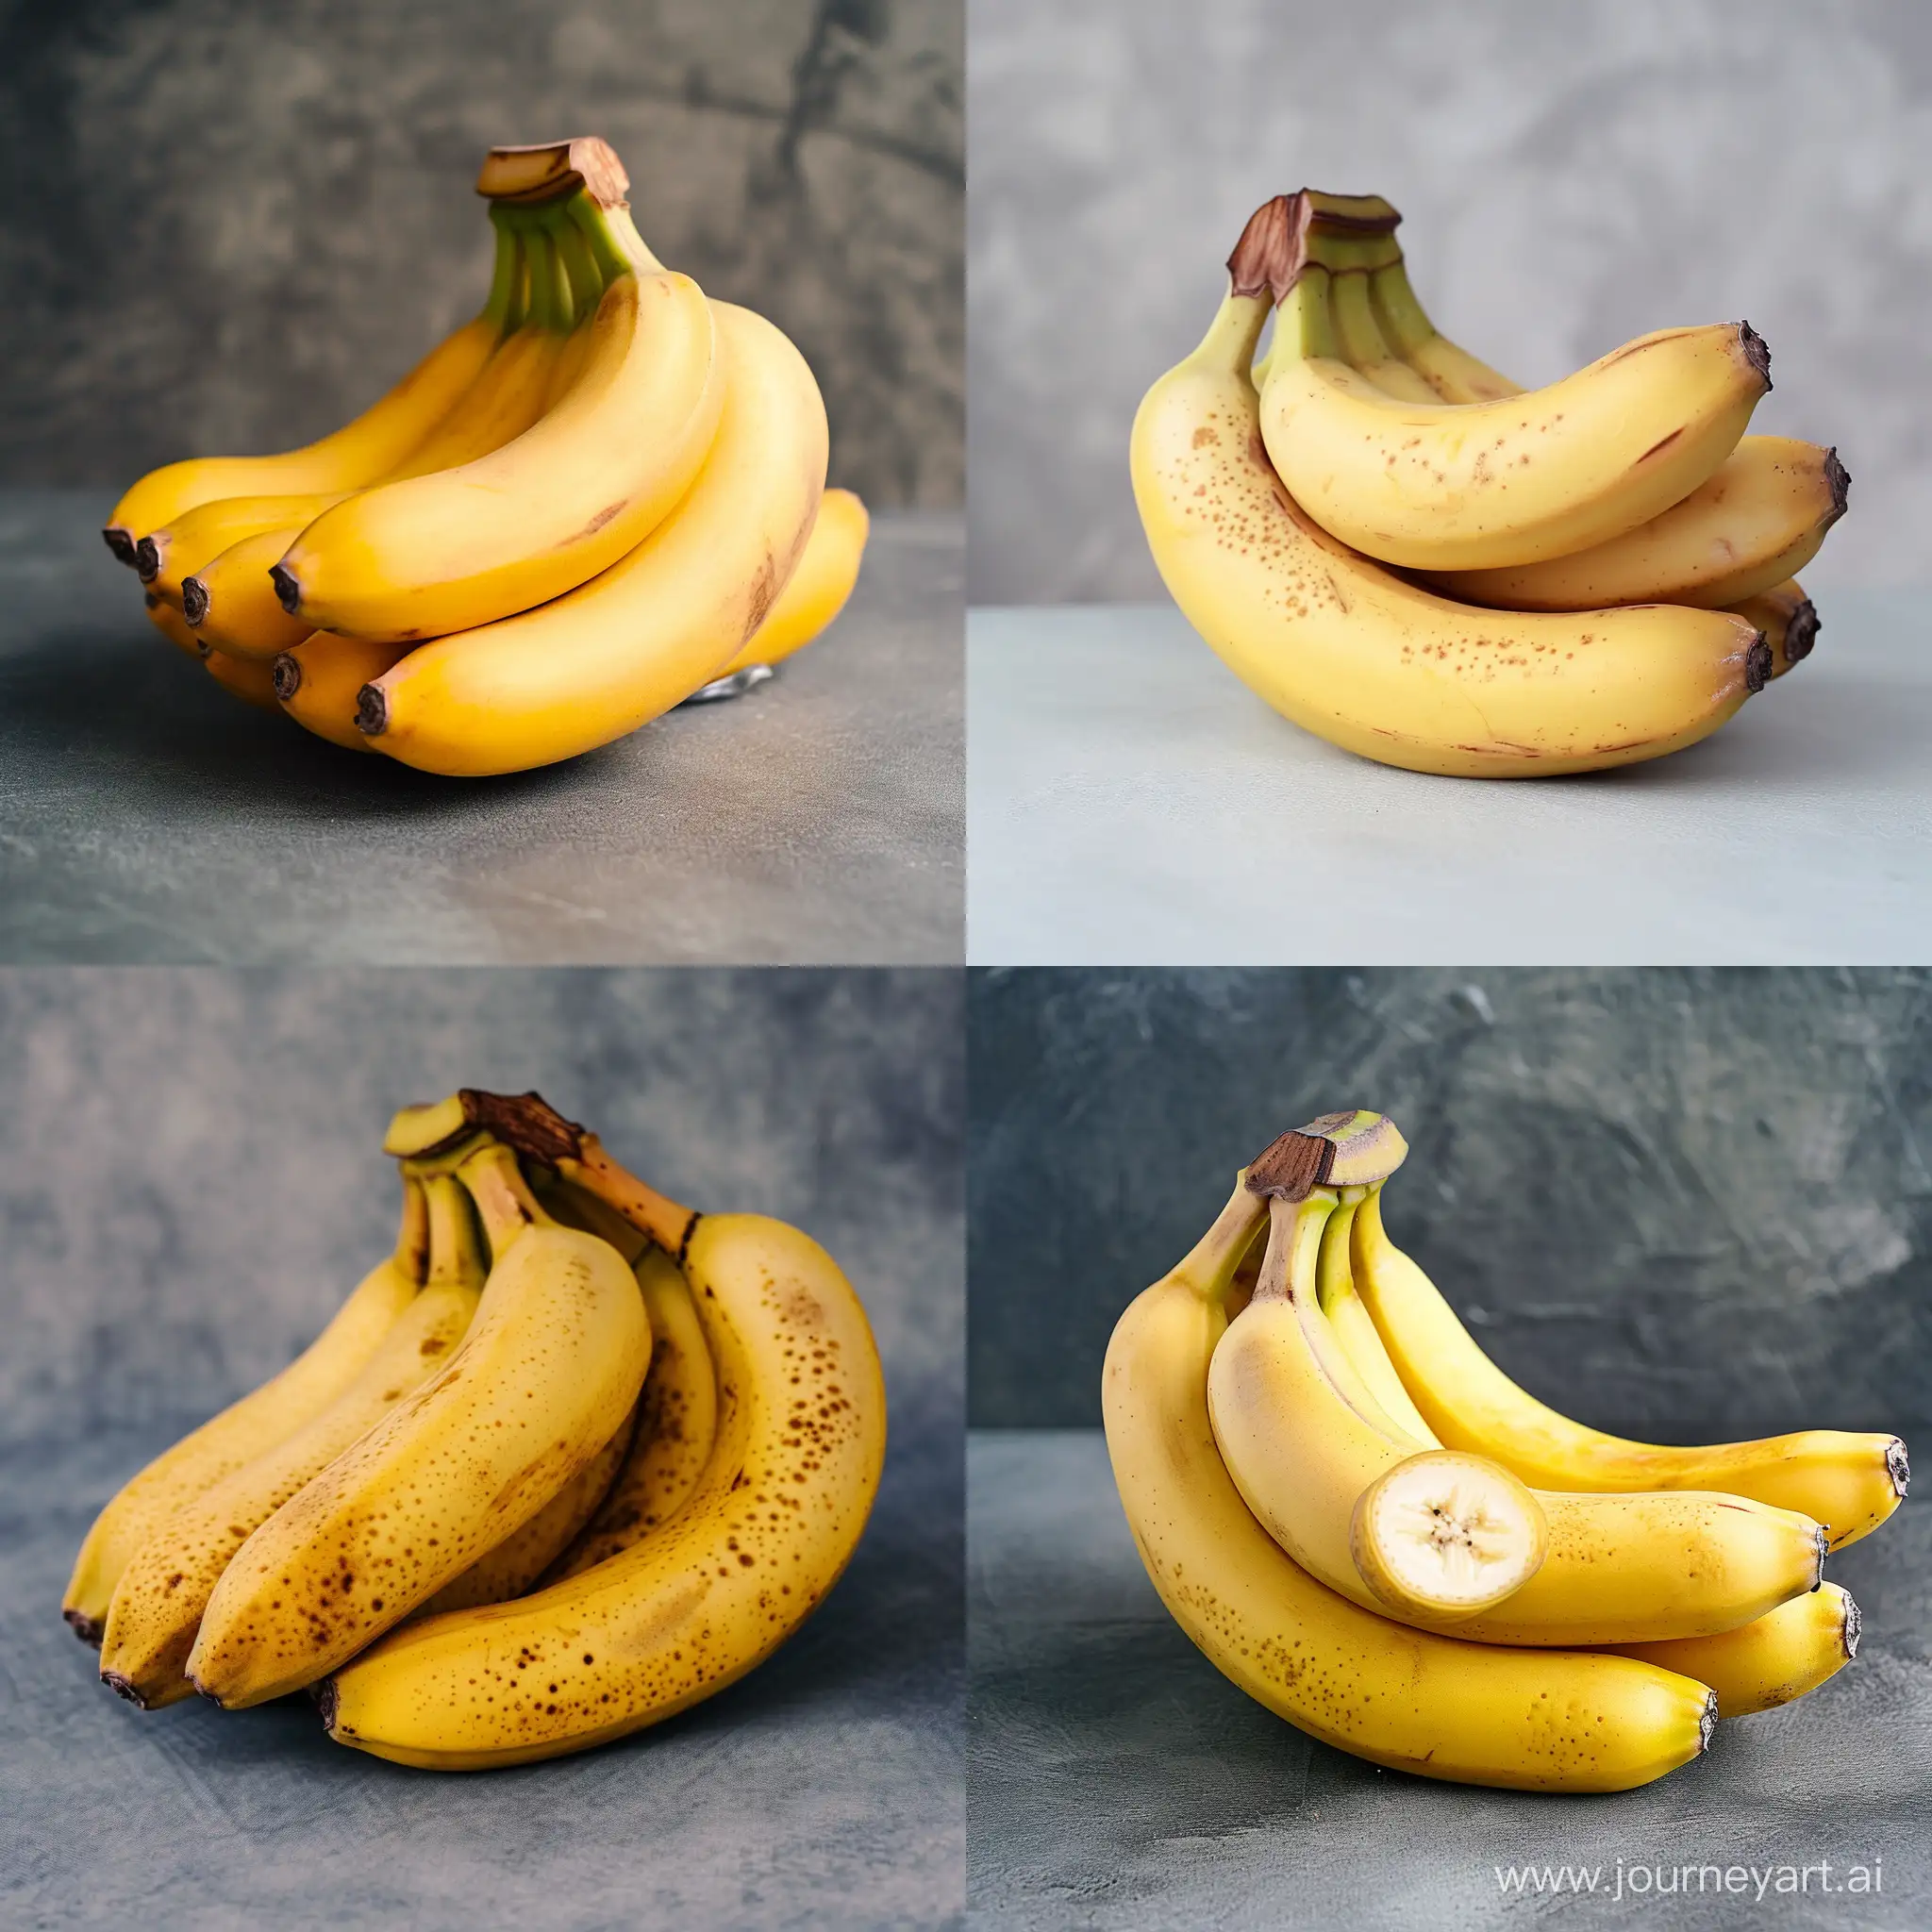 A bunch of perfectly ripe, unblemished bananas with a soft-focus background. Natural image.